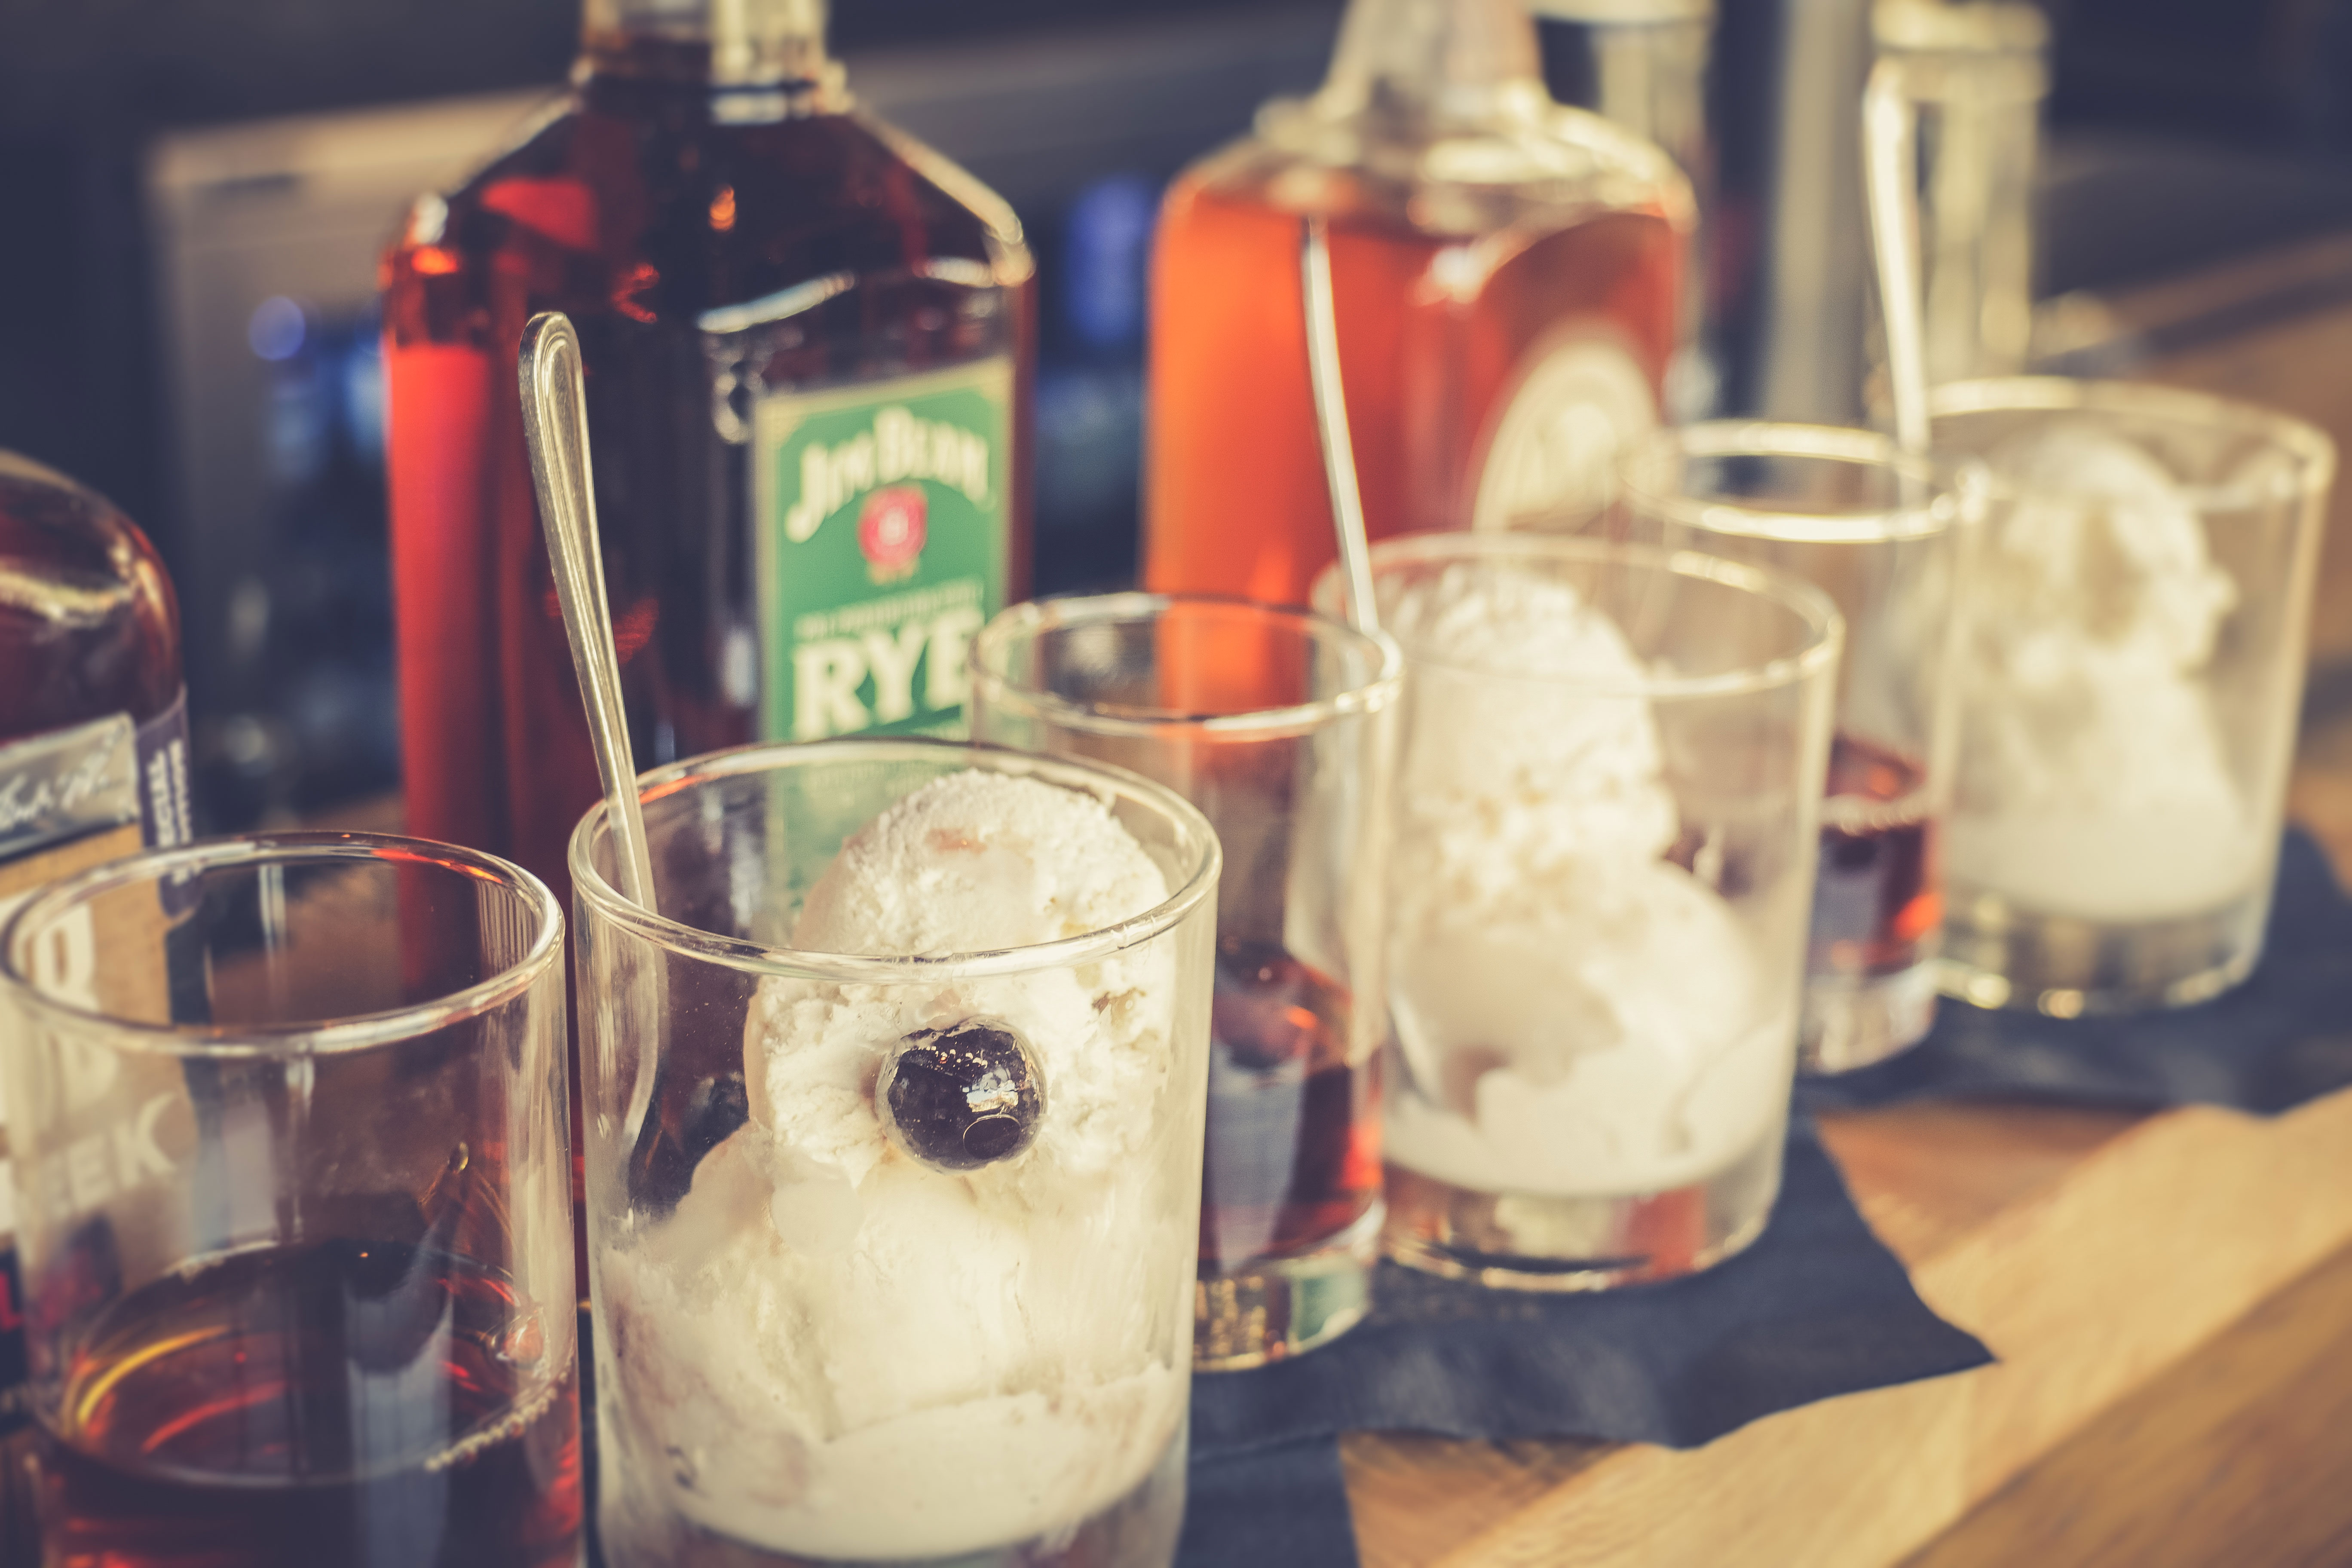 Gamlin Whiskey House Knob Creek Single Barrel, Jim Beam Rye and Rally Point Rye are each paired with an ice cream from Clementine's Naughty & Nice Creamery.